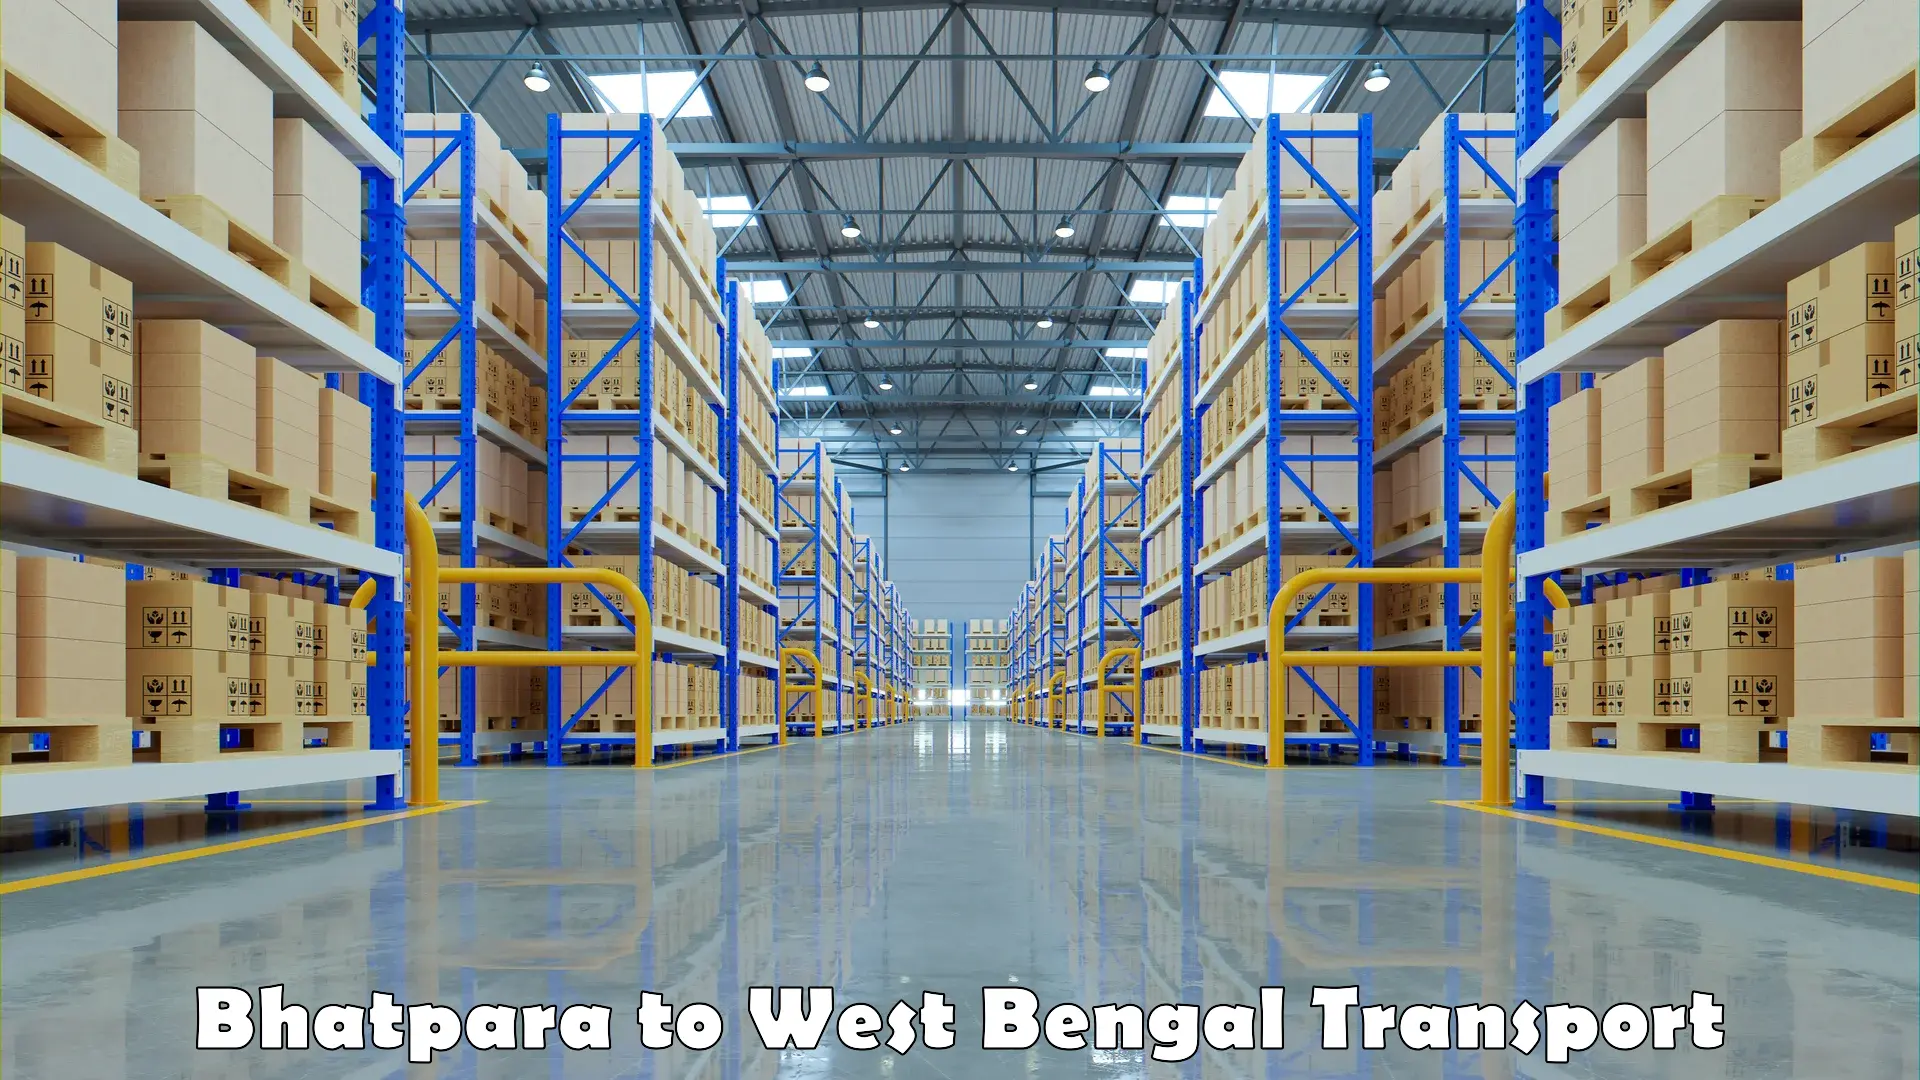 Truck transport companies in India Bhatpara to Midnapore